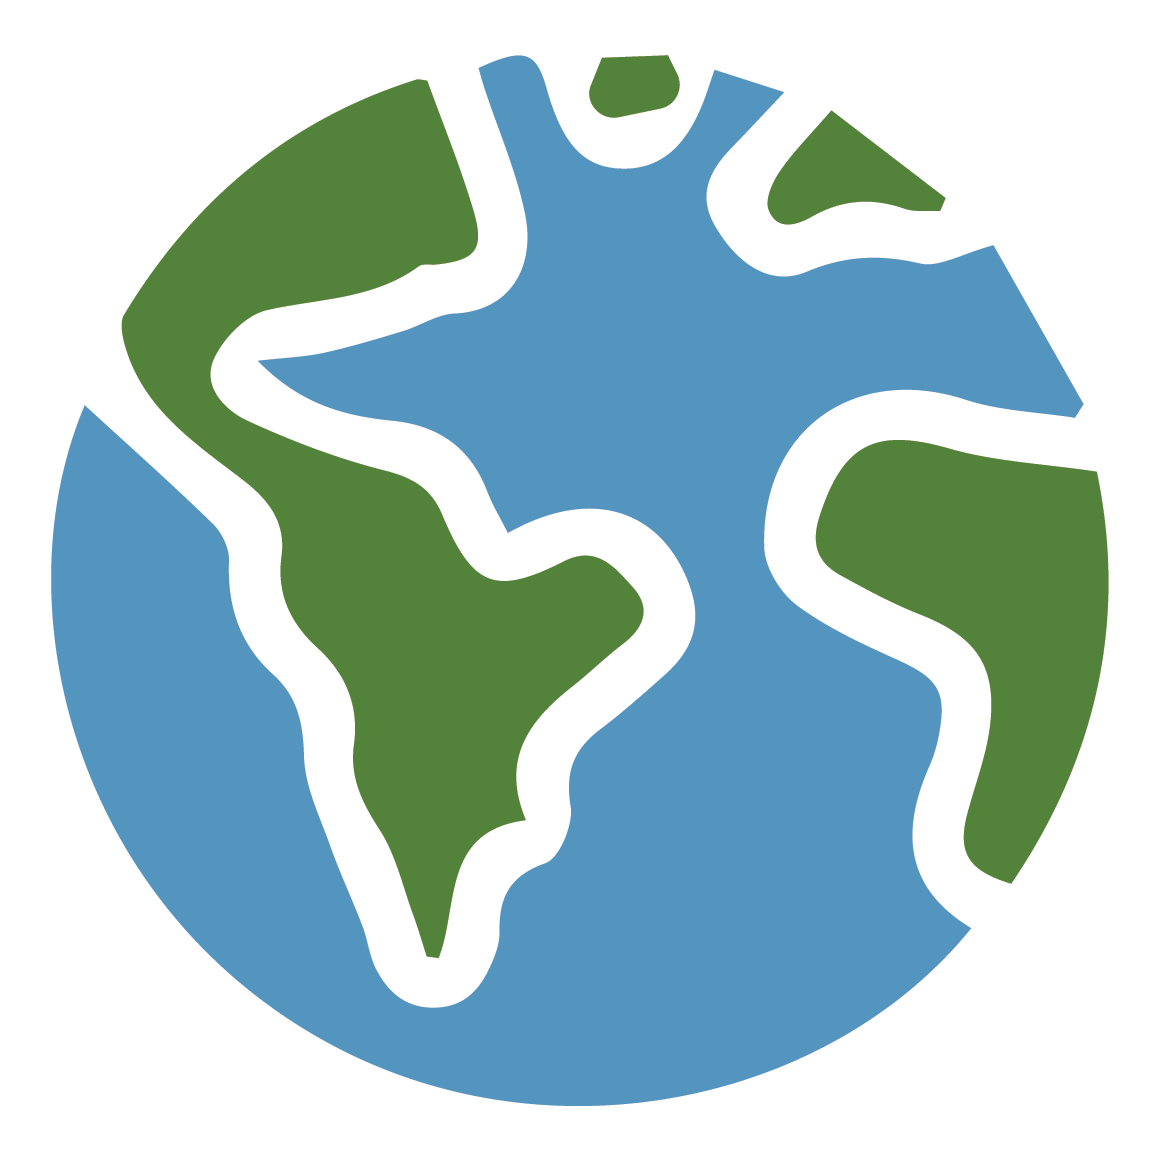 One of the climate-friendly icons - a blue and green Earth